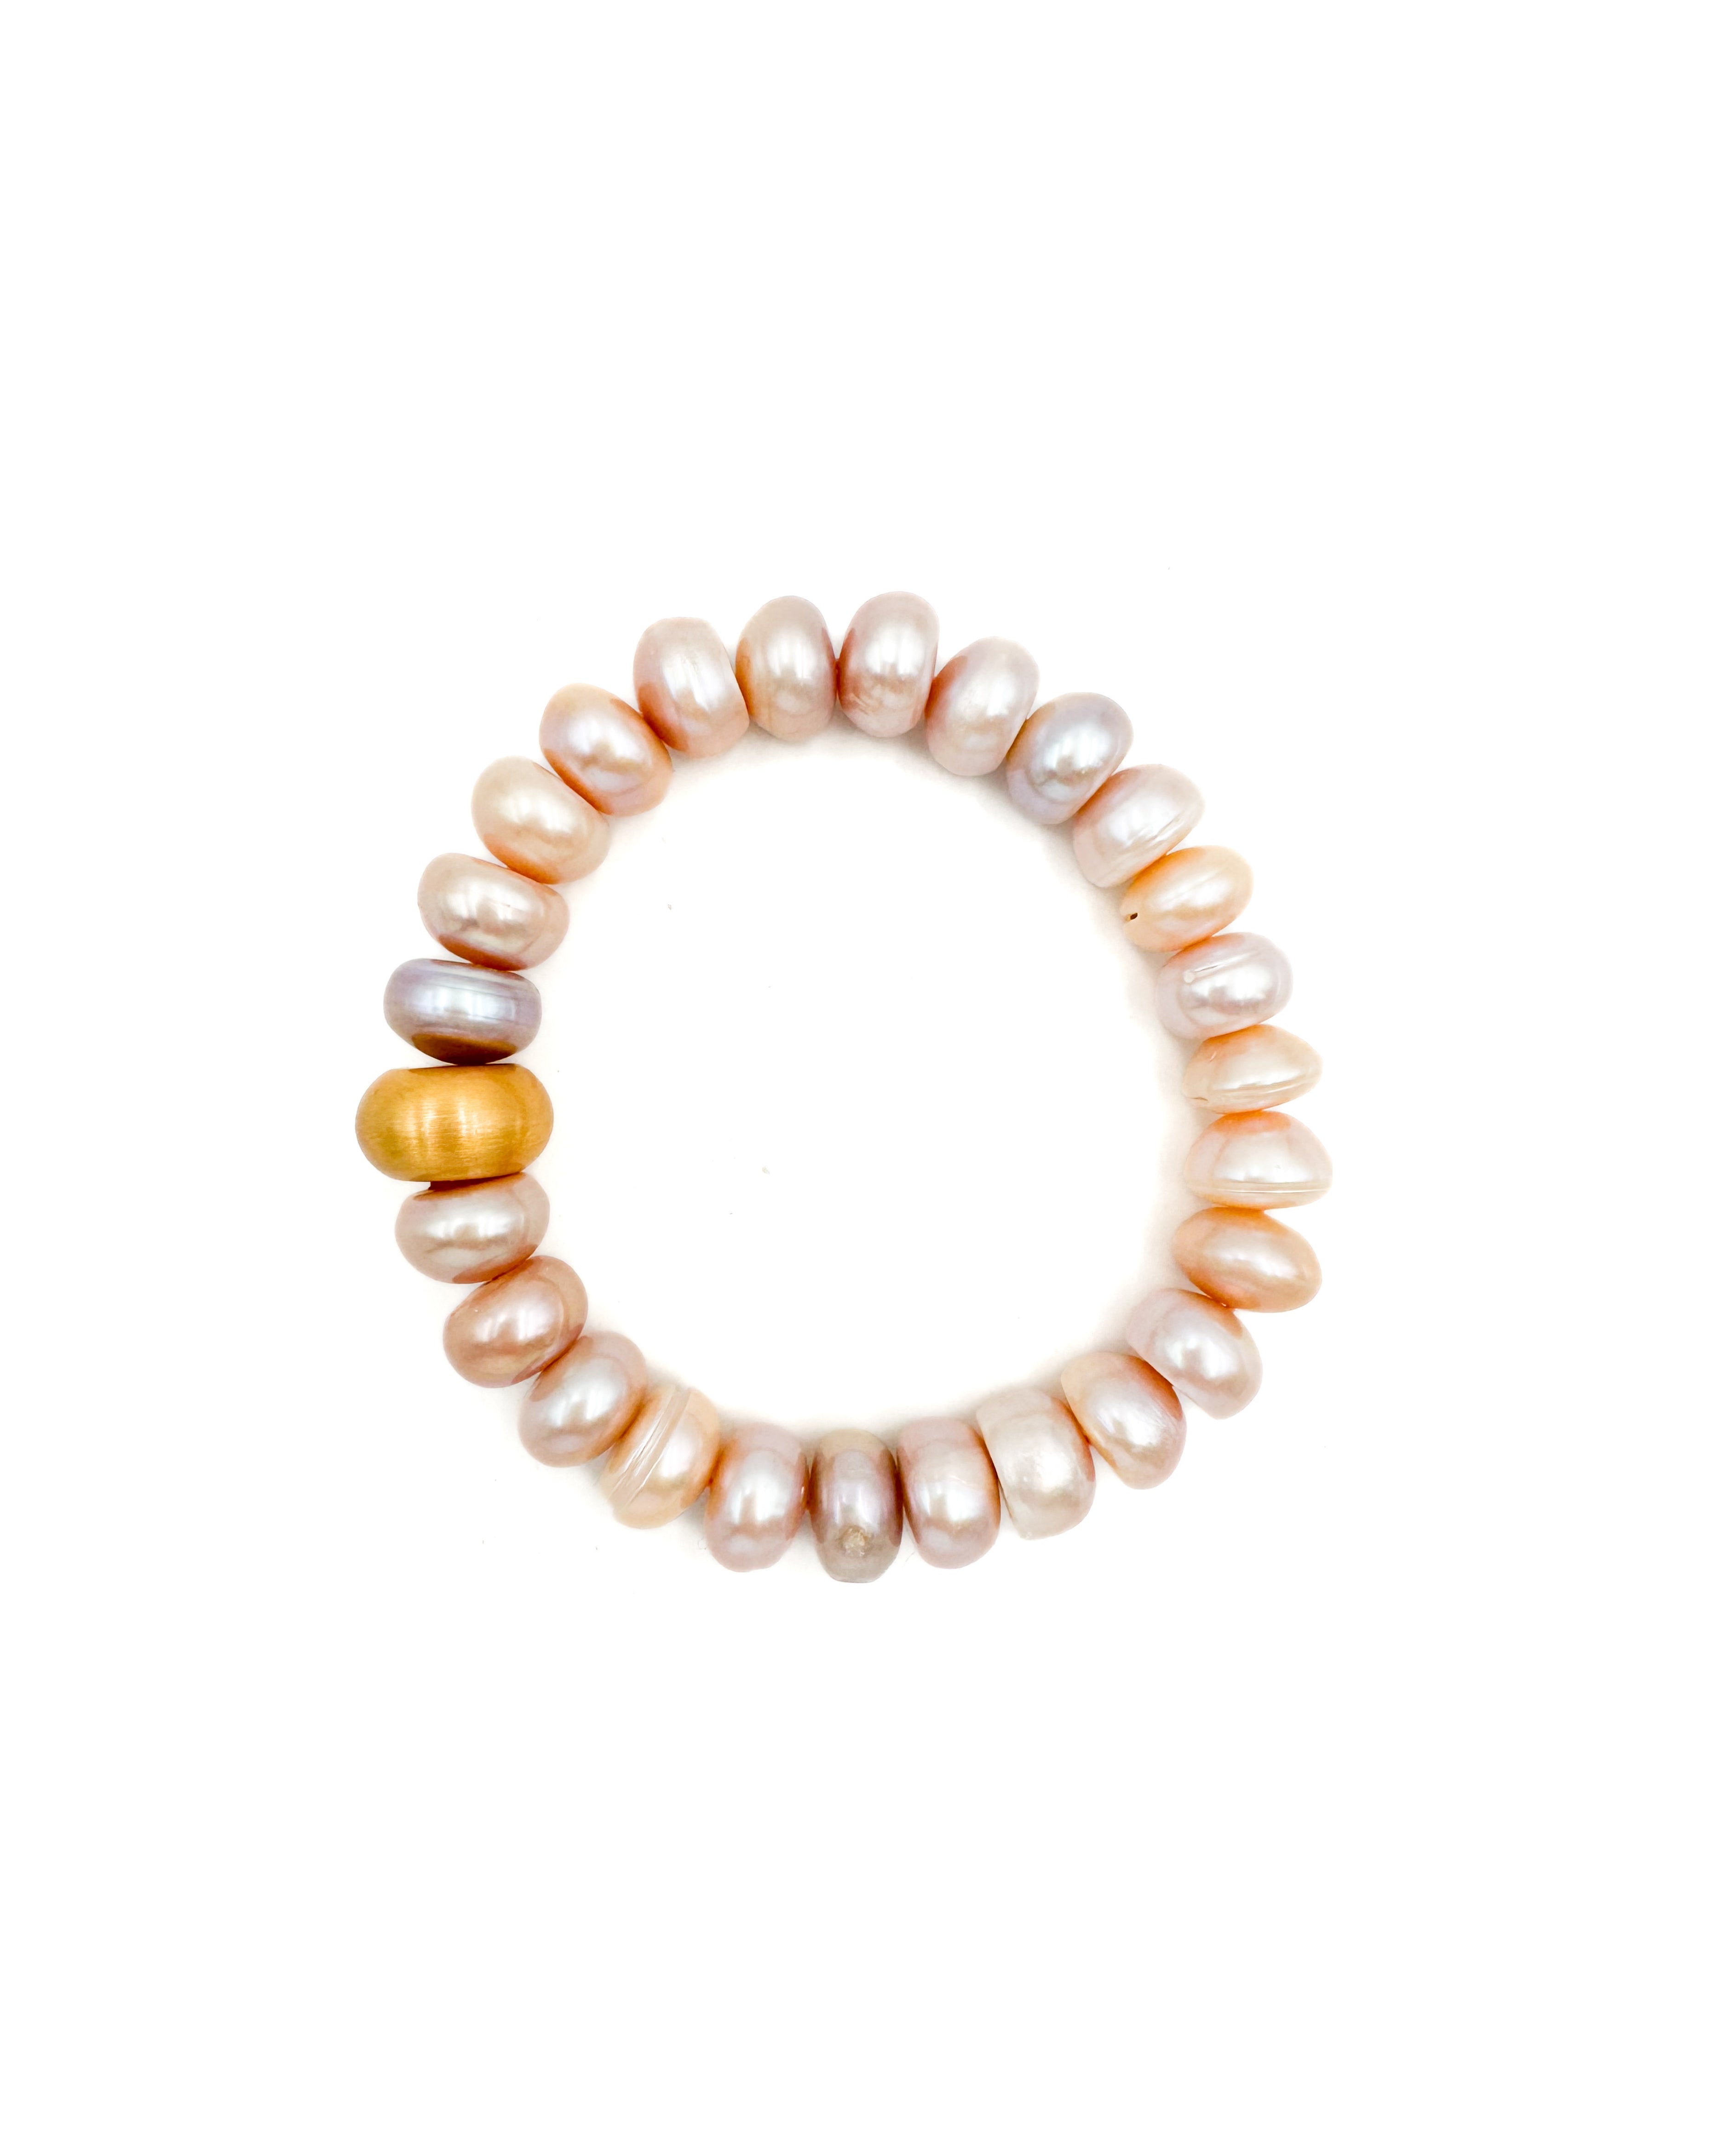 Pale Peach Pearl Stretch Bracelet with Brushed Accent